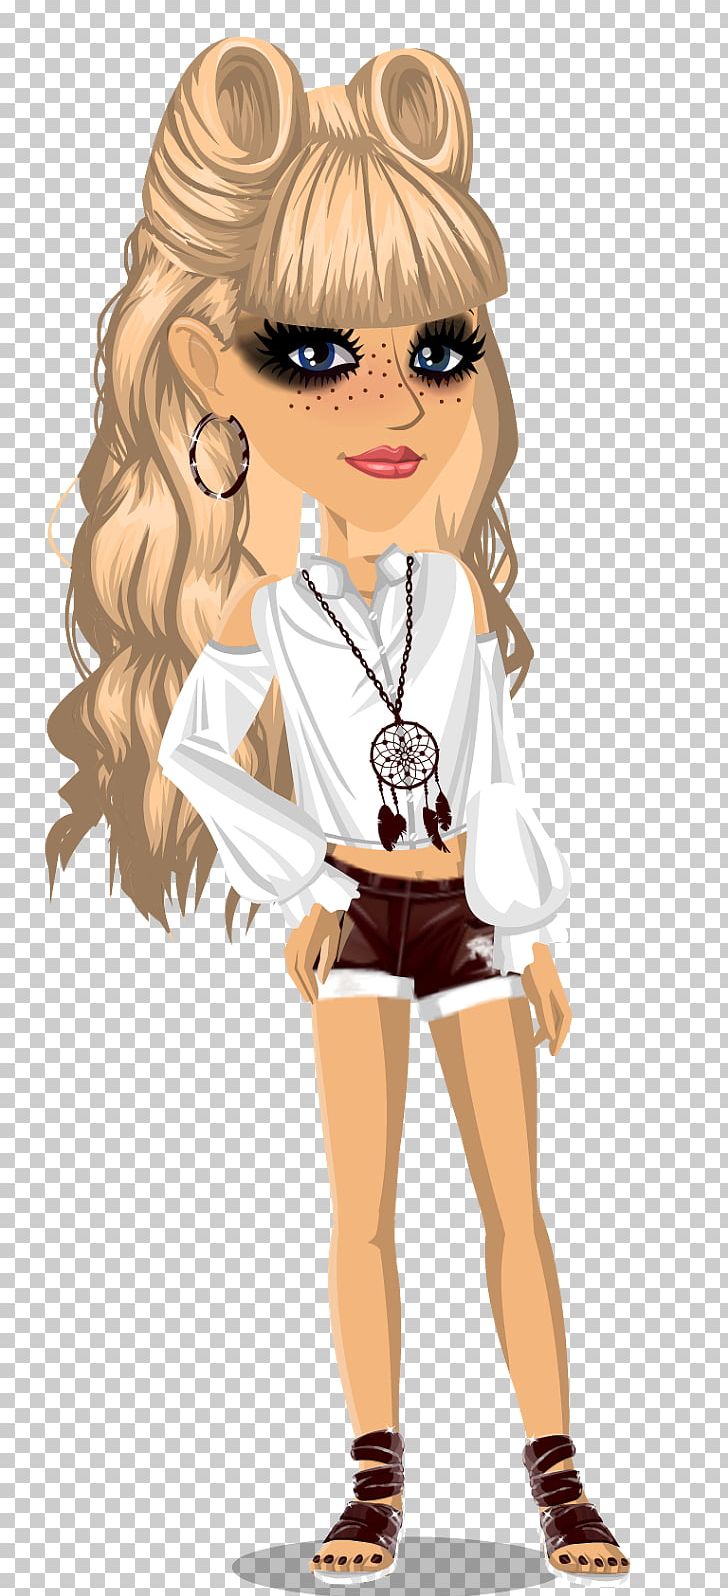 MovieStarPlanet Child Game Blog Color PNG, Clipart, Art, Blog, Blond, Brown Hair, Cartoon Free PNG Download